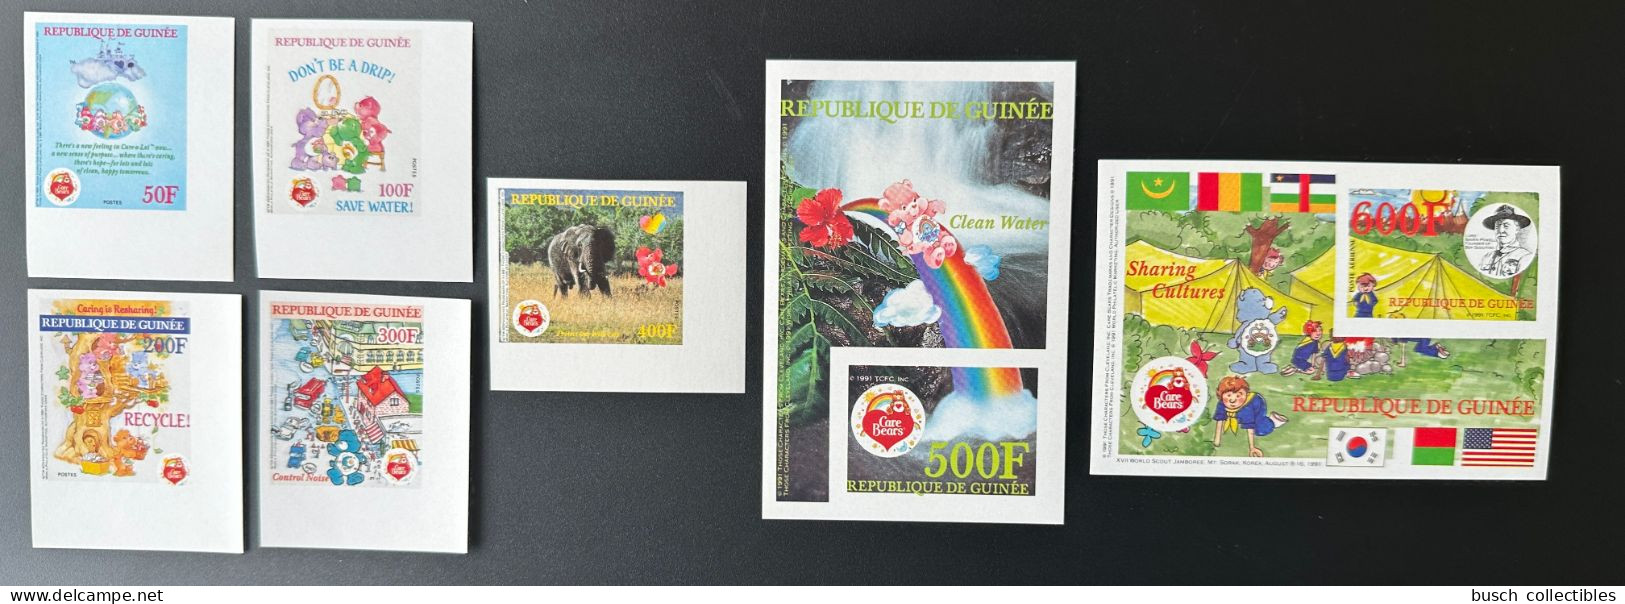 Guinée Guinea 1991 Mi. 1359 1363B Bl. 408 409B ND IMPERF Bears Elephant Scouts Flags Faune Faune Scoutisme Pfadfinder - Unused Stamps